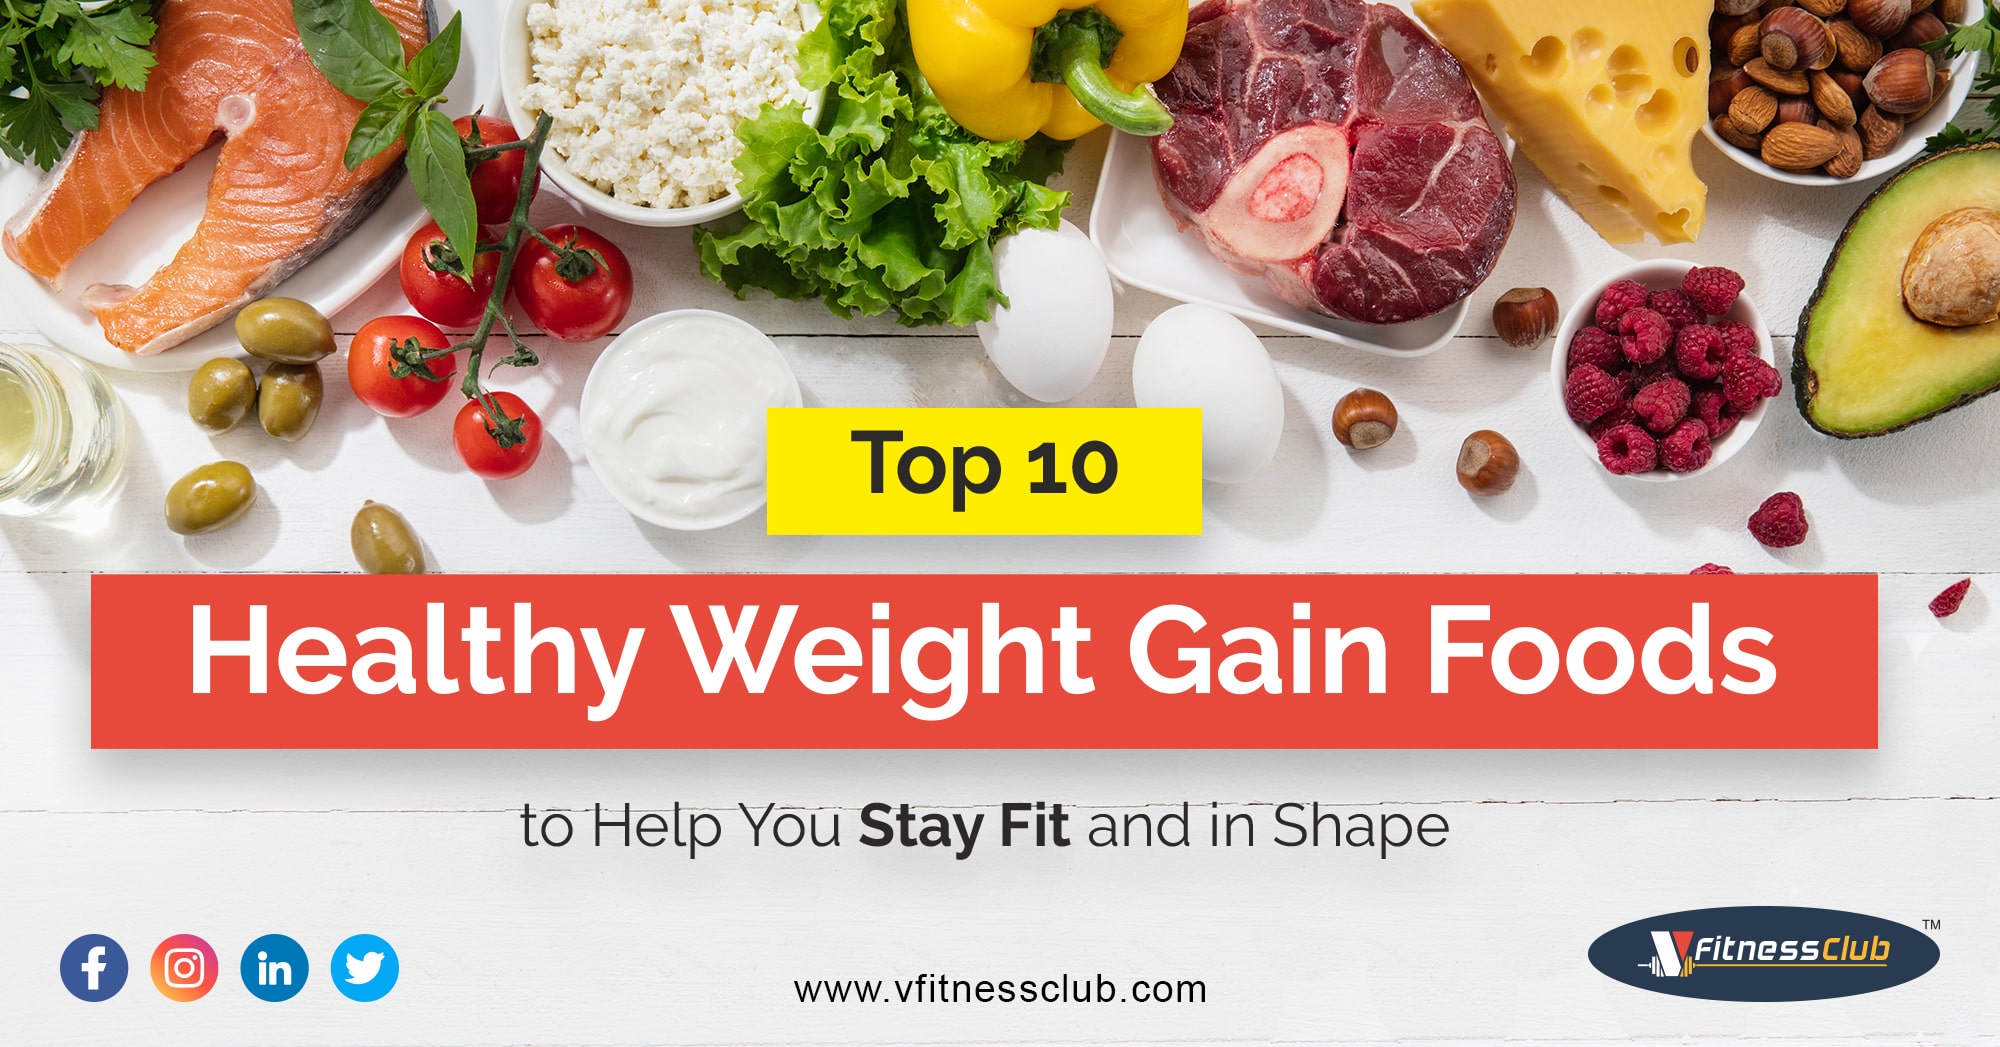 Top 10 Healthy Weight Gain Foods to Help You Stay Fit and in Shape